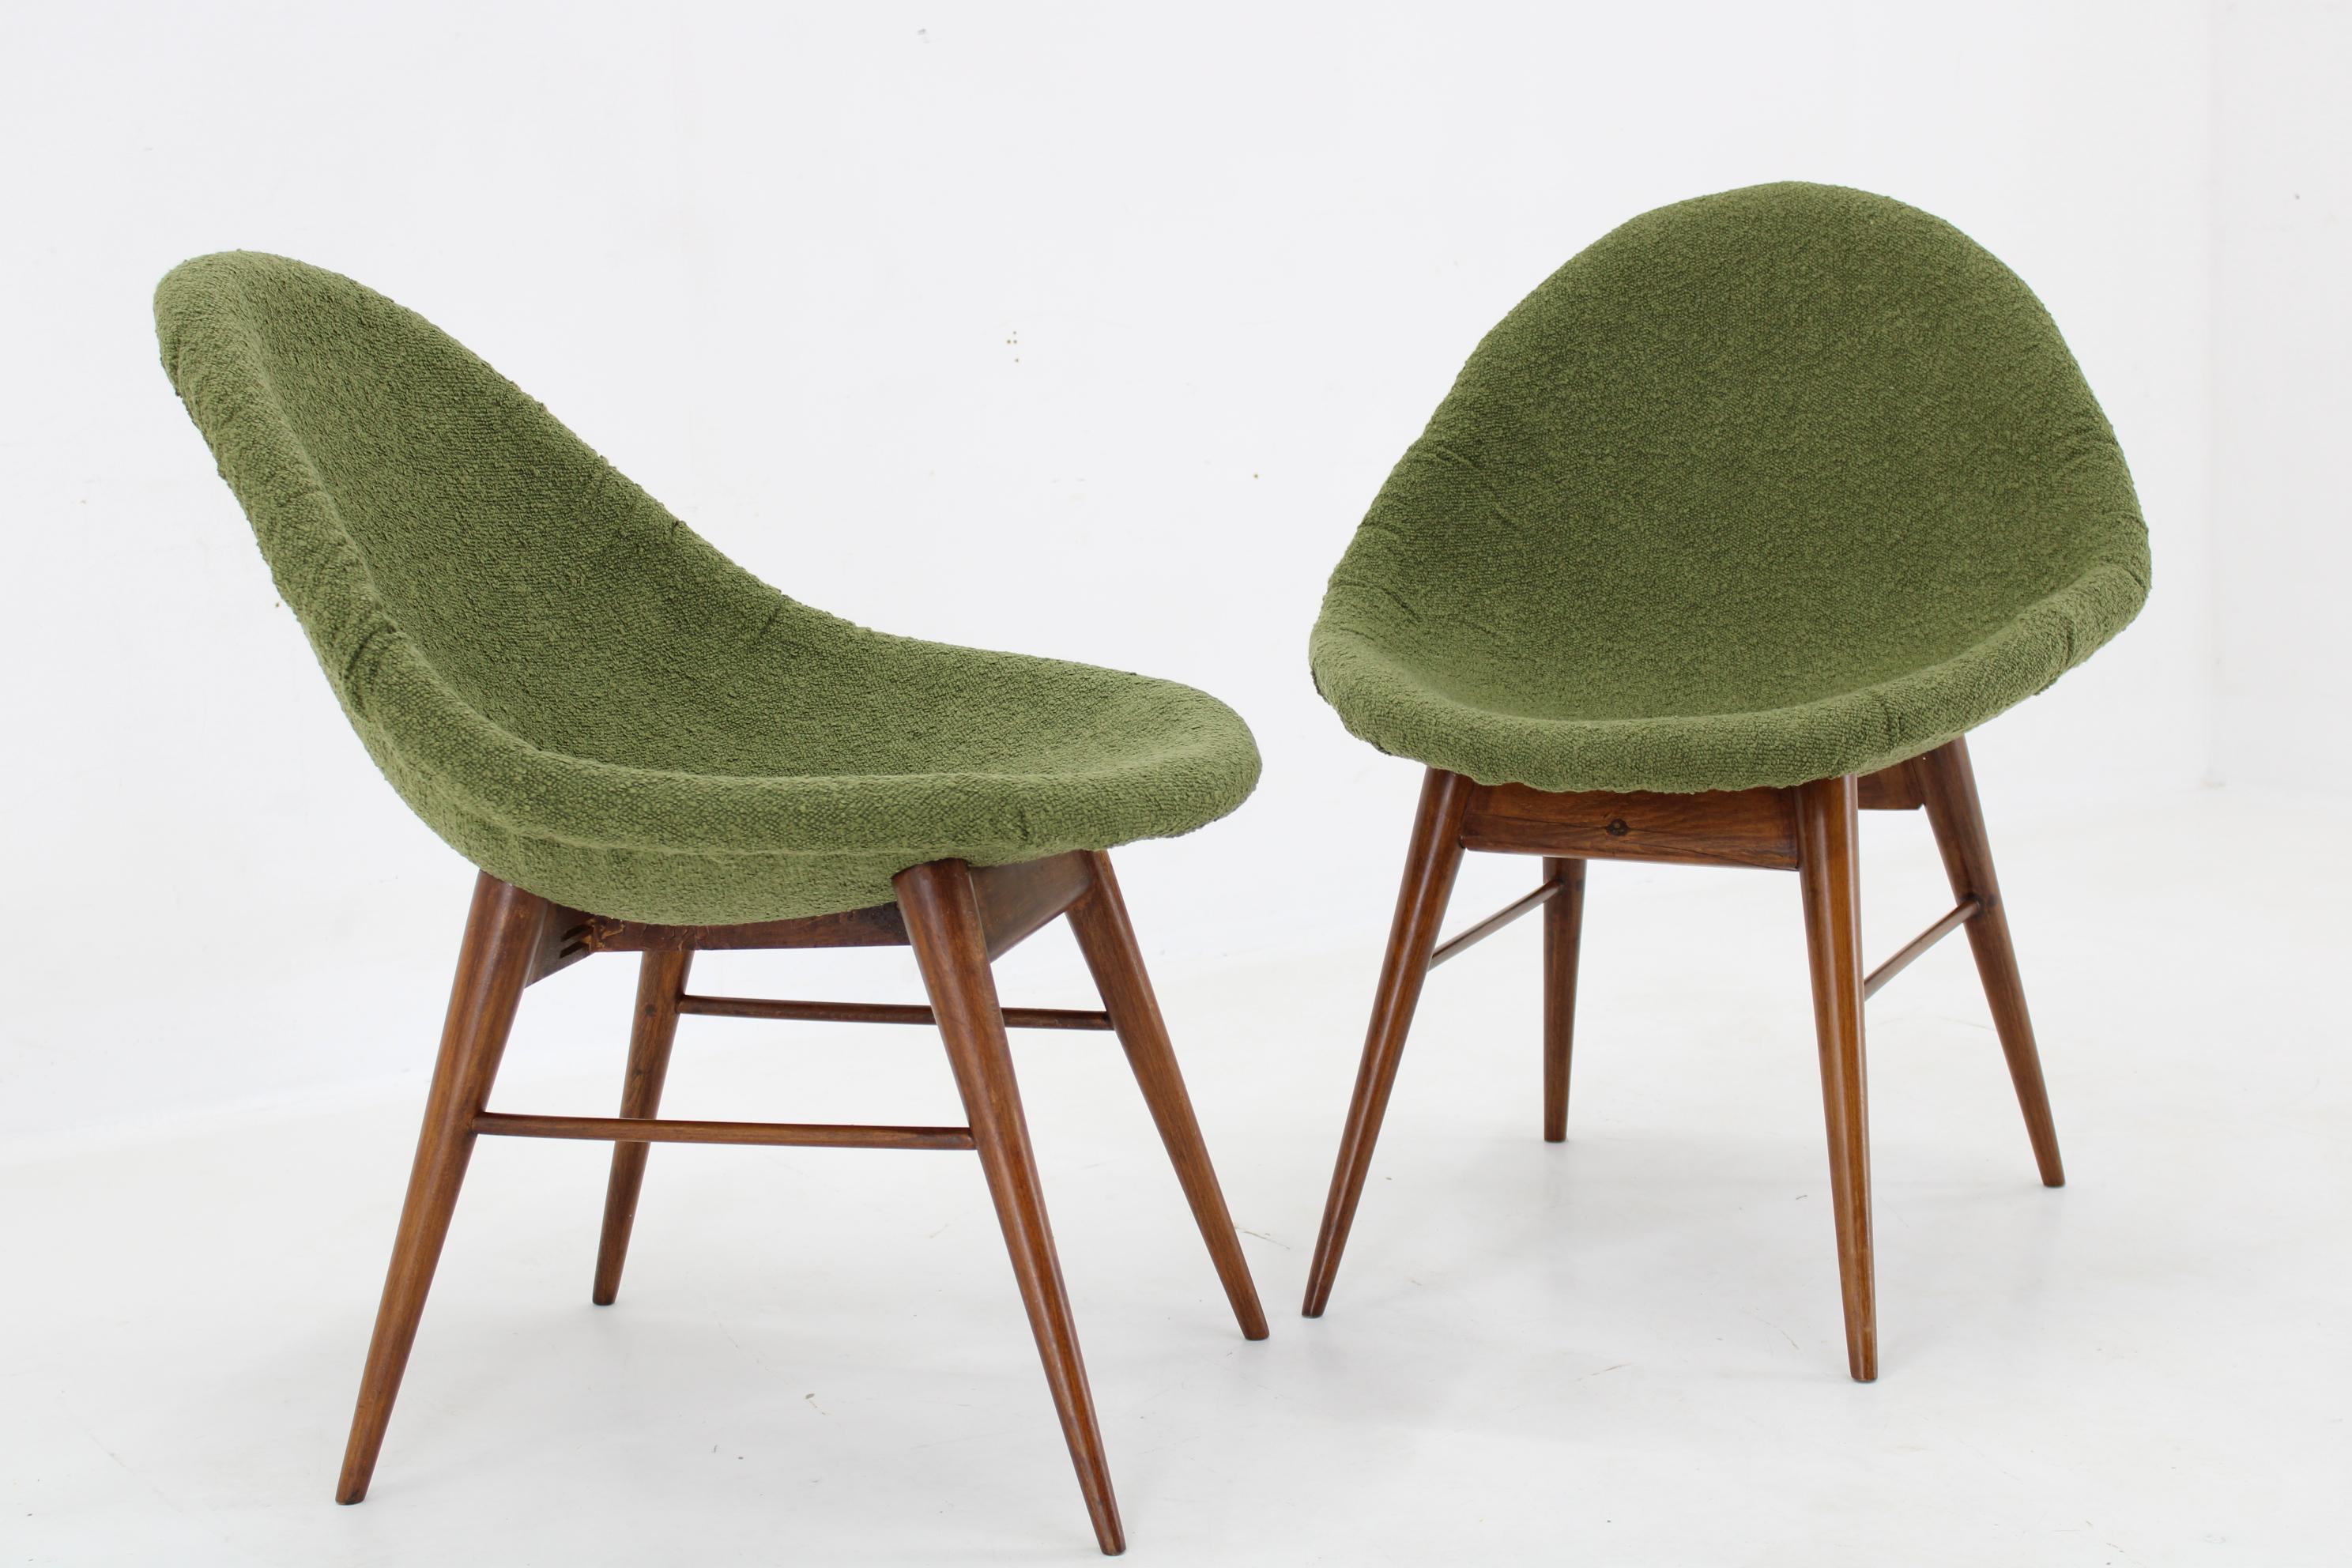 - newly upholstered in green boucle fabric 
- wooden parts have been carefully refurbished   
- high of seat 42 cm
